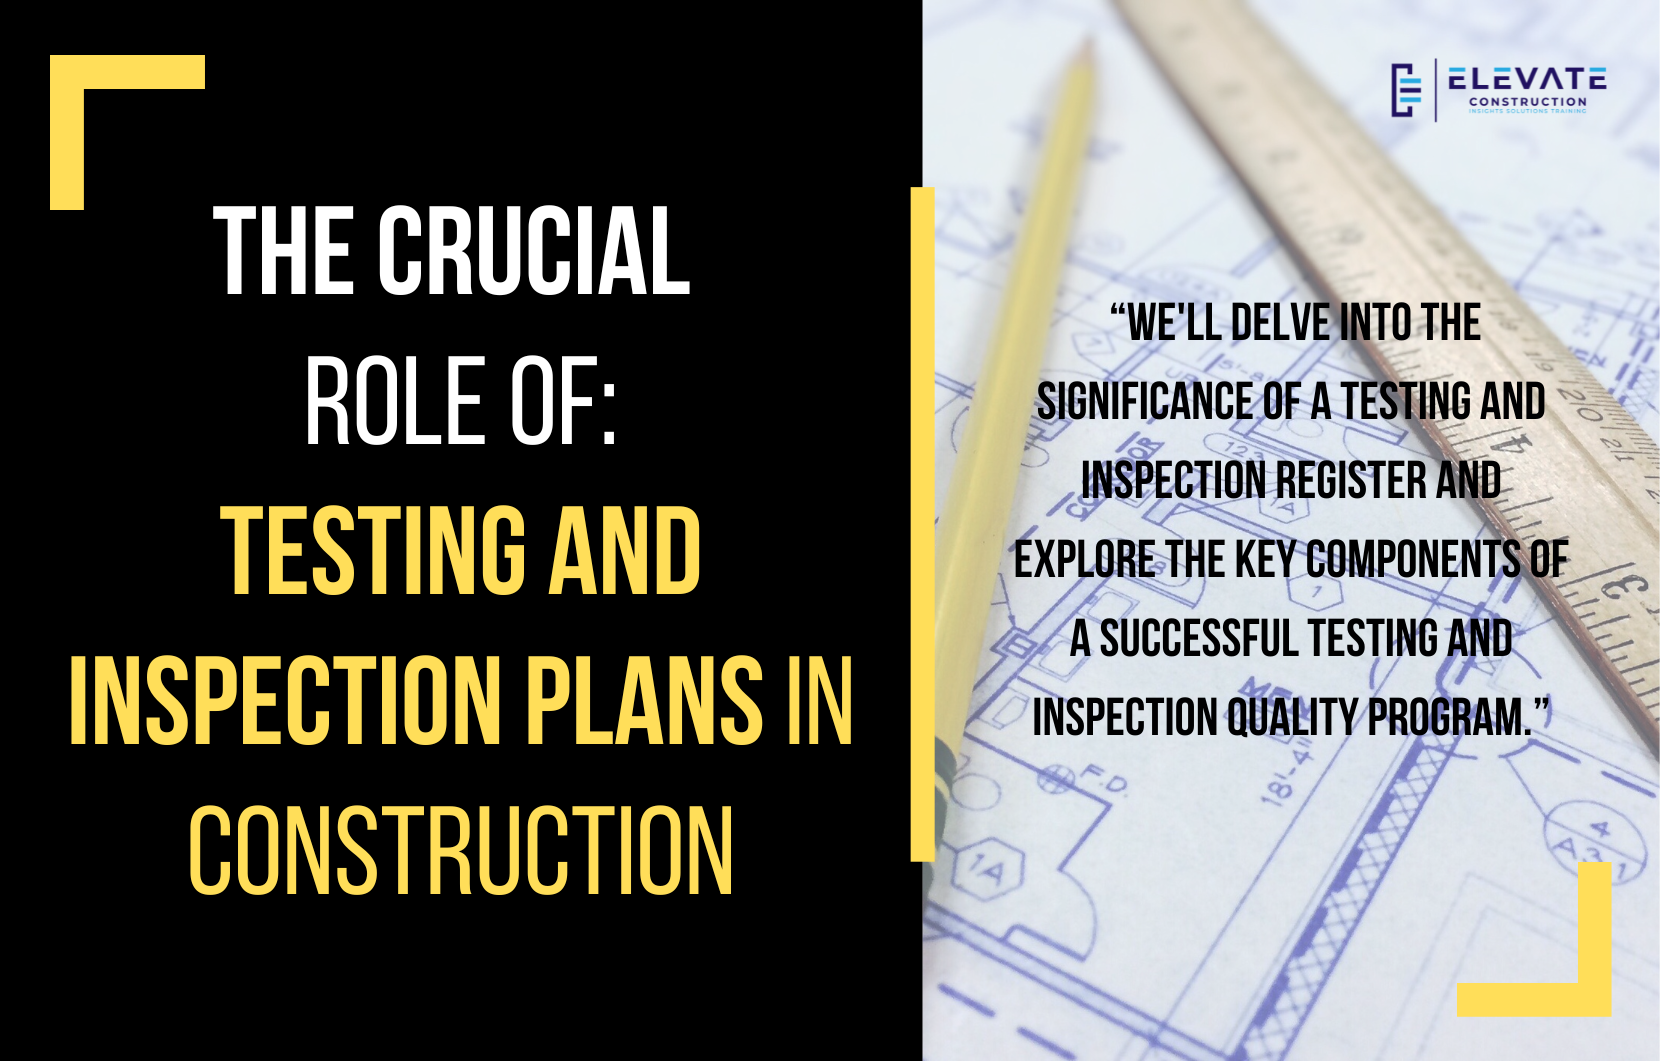 The Crucial Role of Testing and Inspection Plans in Construction